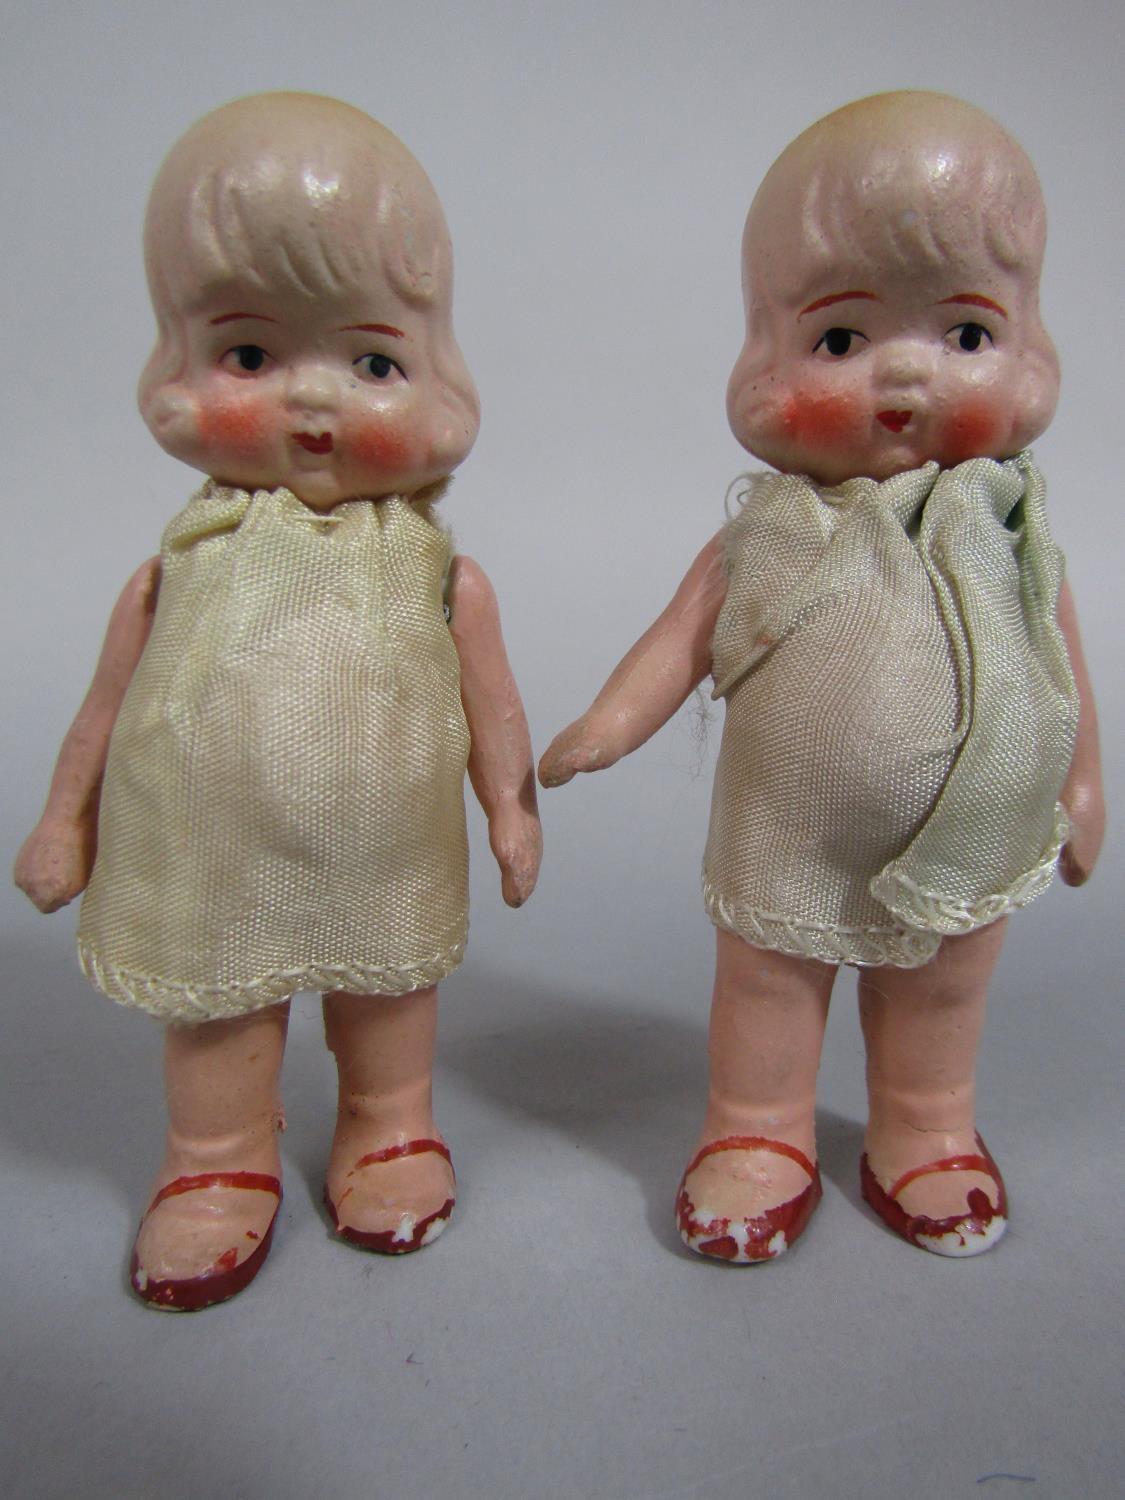 A collection of mainly early to mid-20th century novelty cake ornaments including Snow Babies, - Image 2 of 2